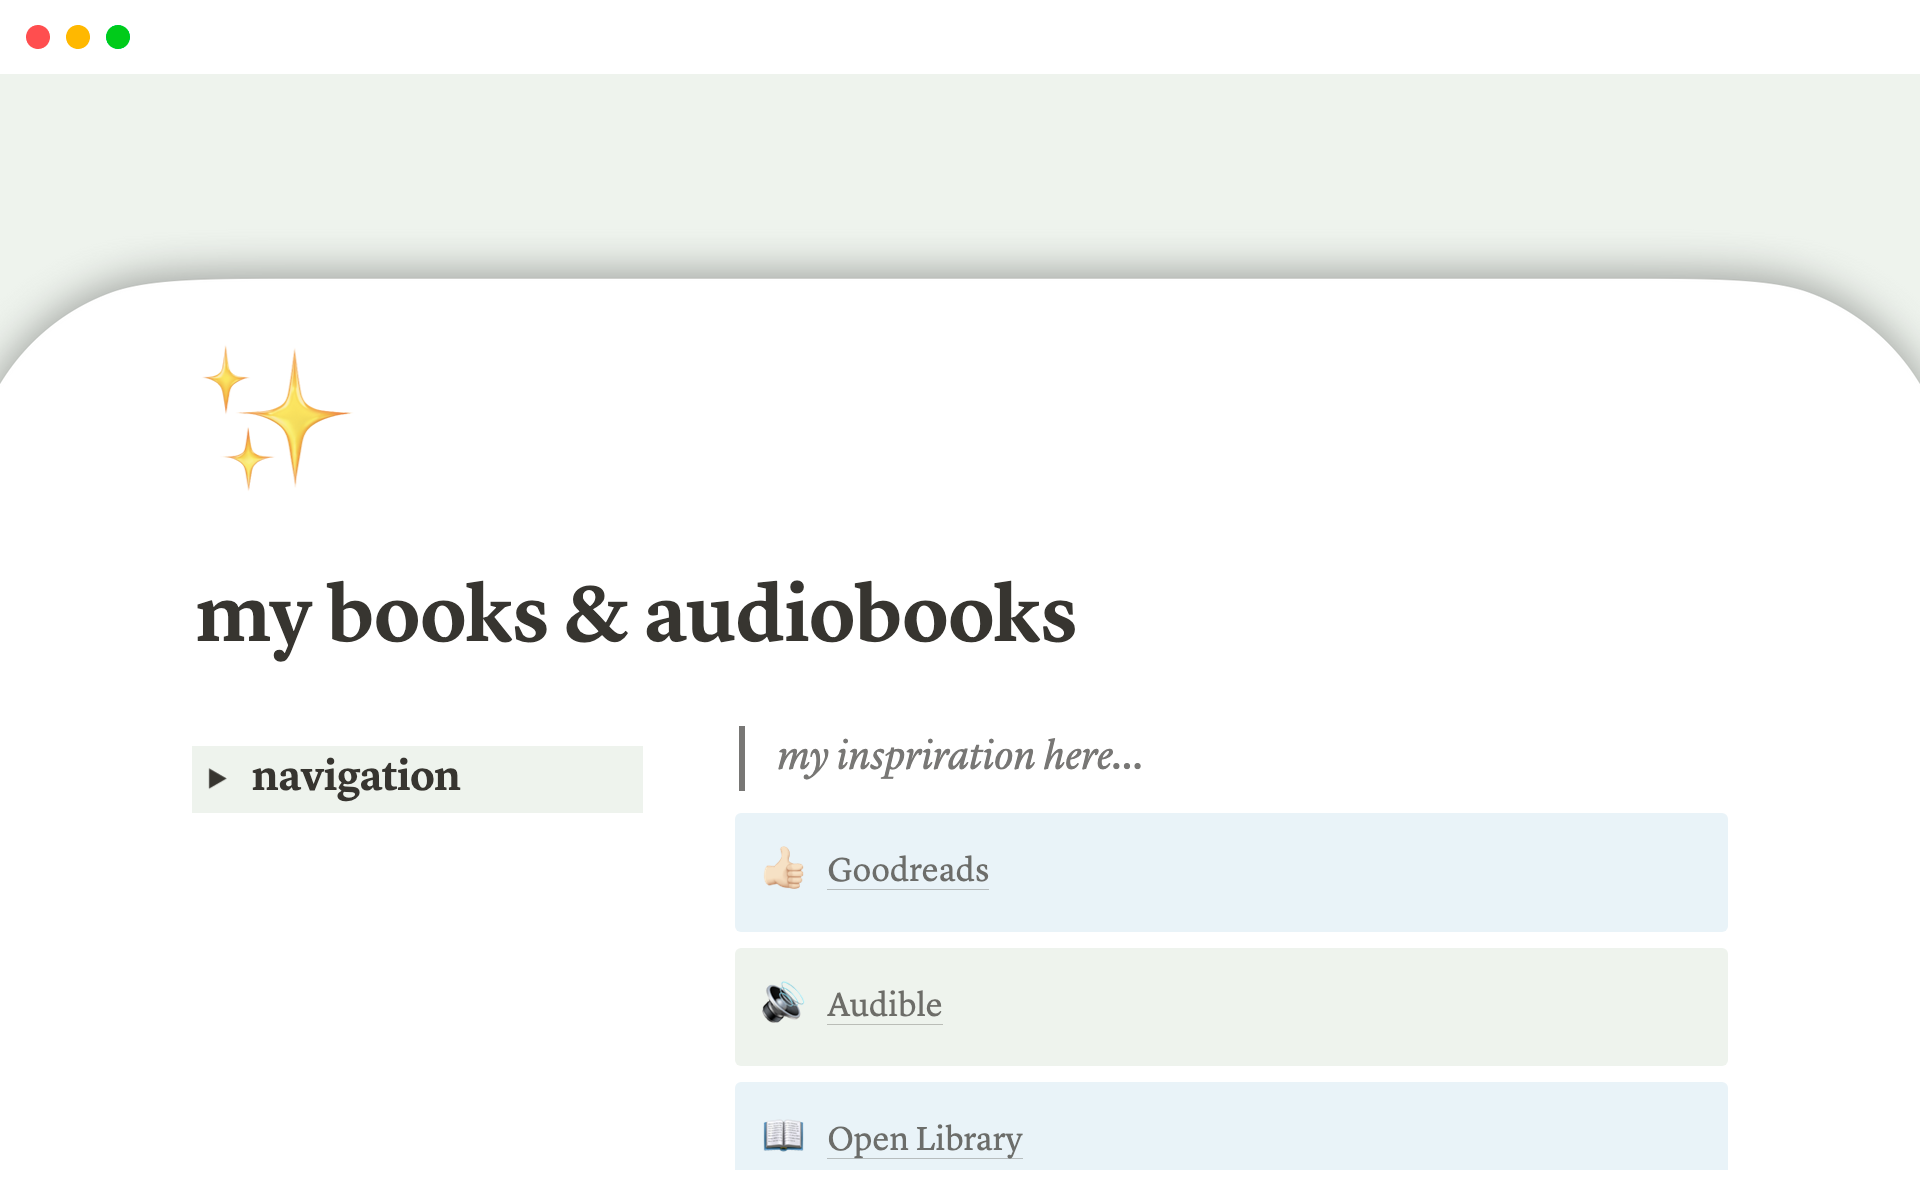 Keep track of your reading or audiobook listening progress, and catalog your books, ebooks, audiobooks, authors, and genres all in one place.